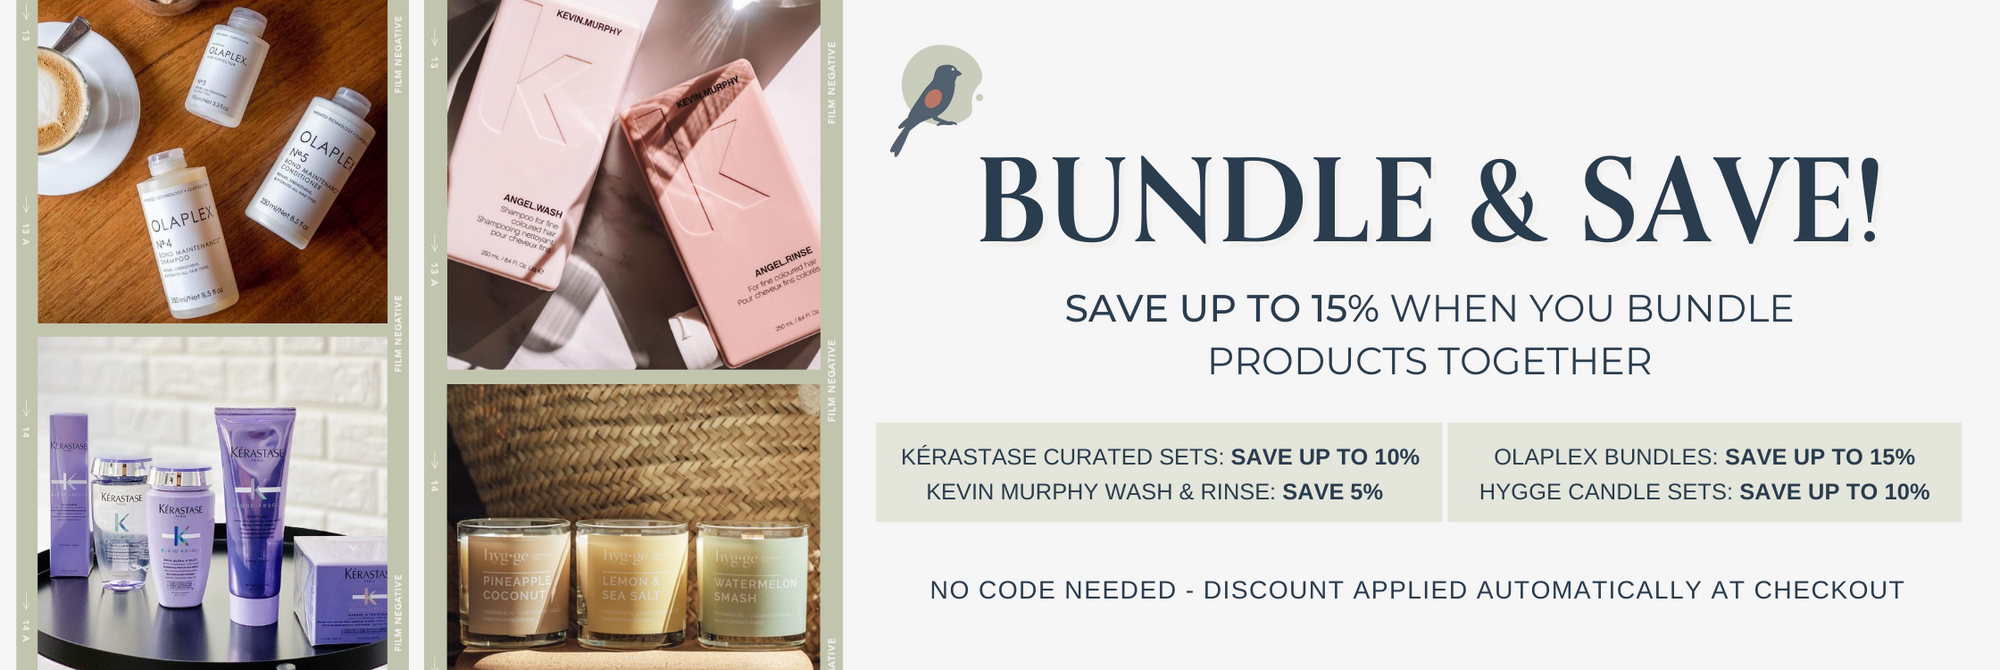 Bundle & save banner from Salon Society, save up to 15% when you bundle products. No code needed, discount applied at checkout.